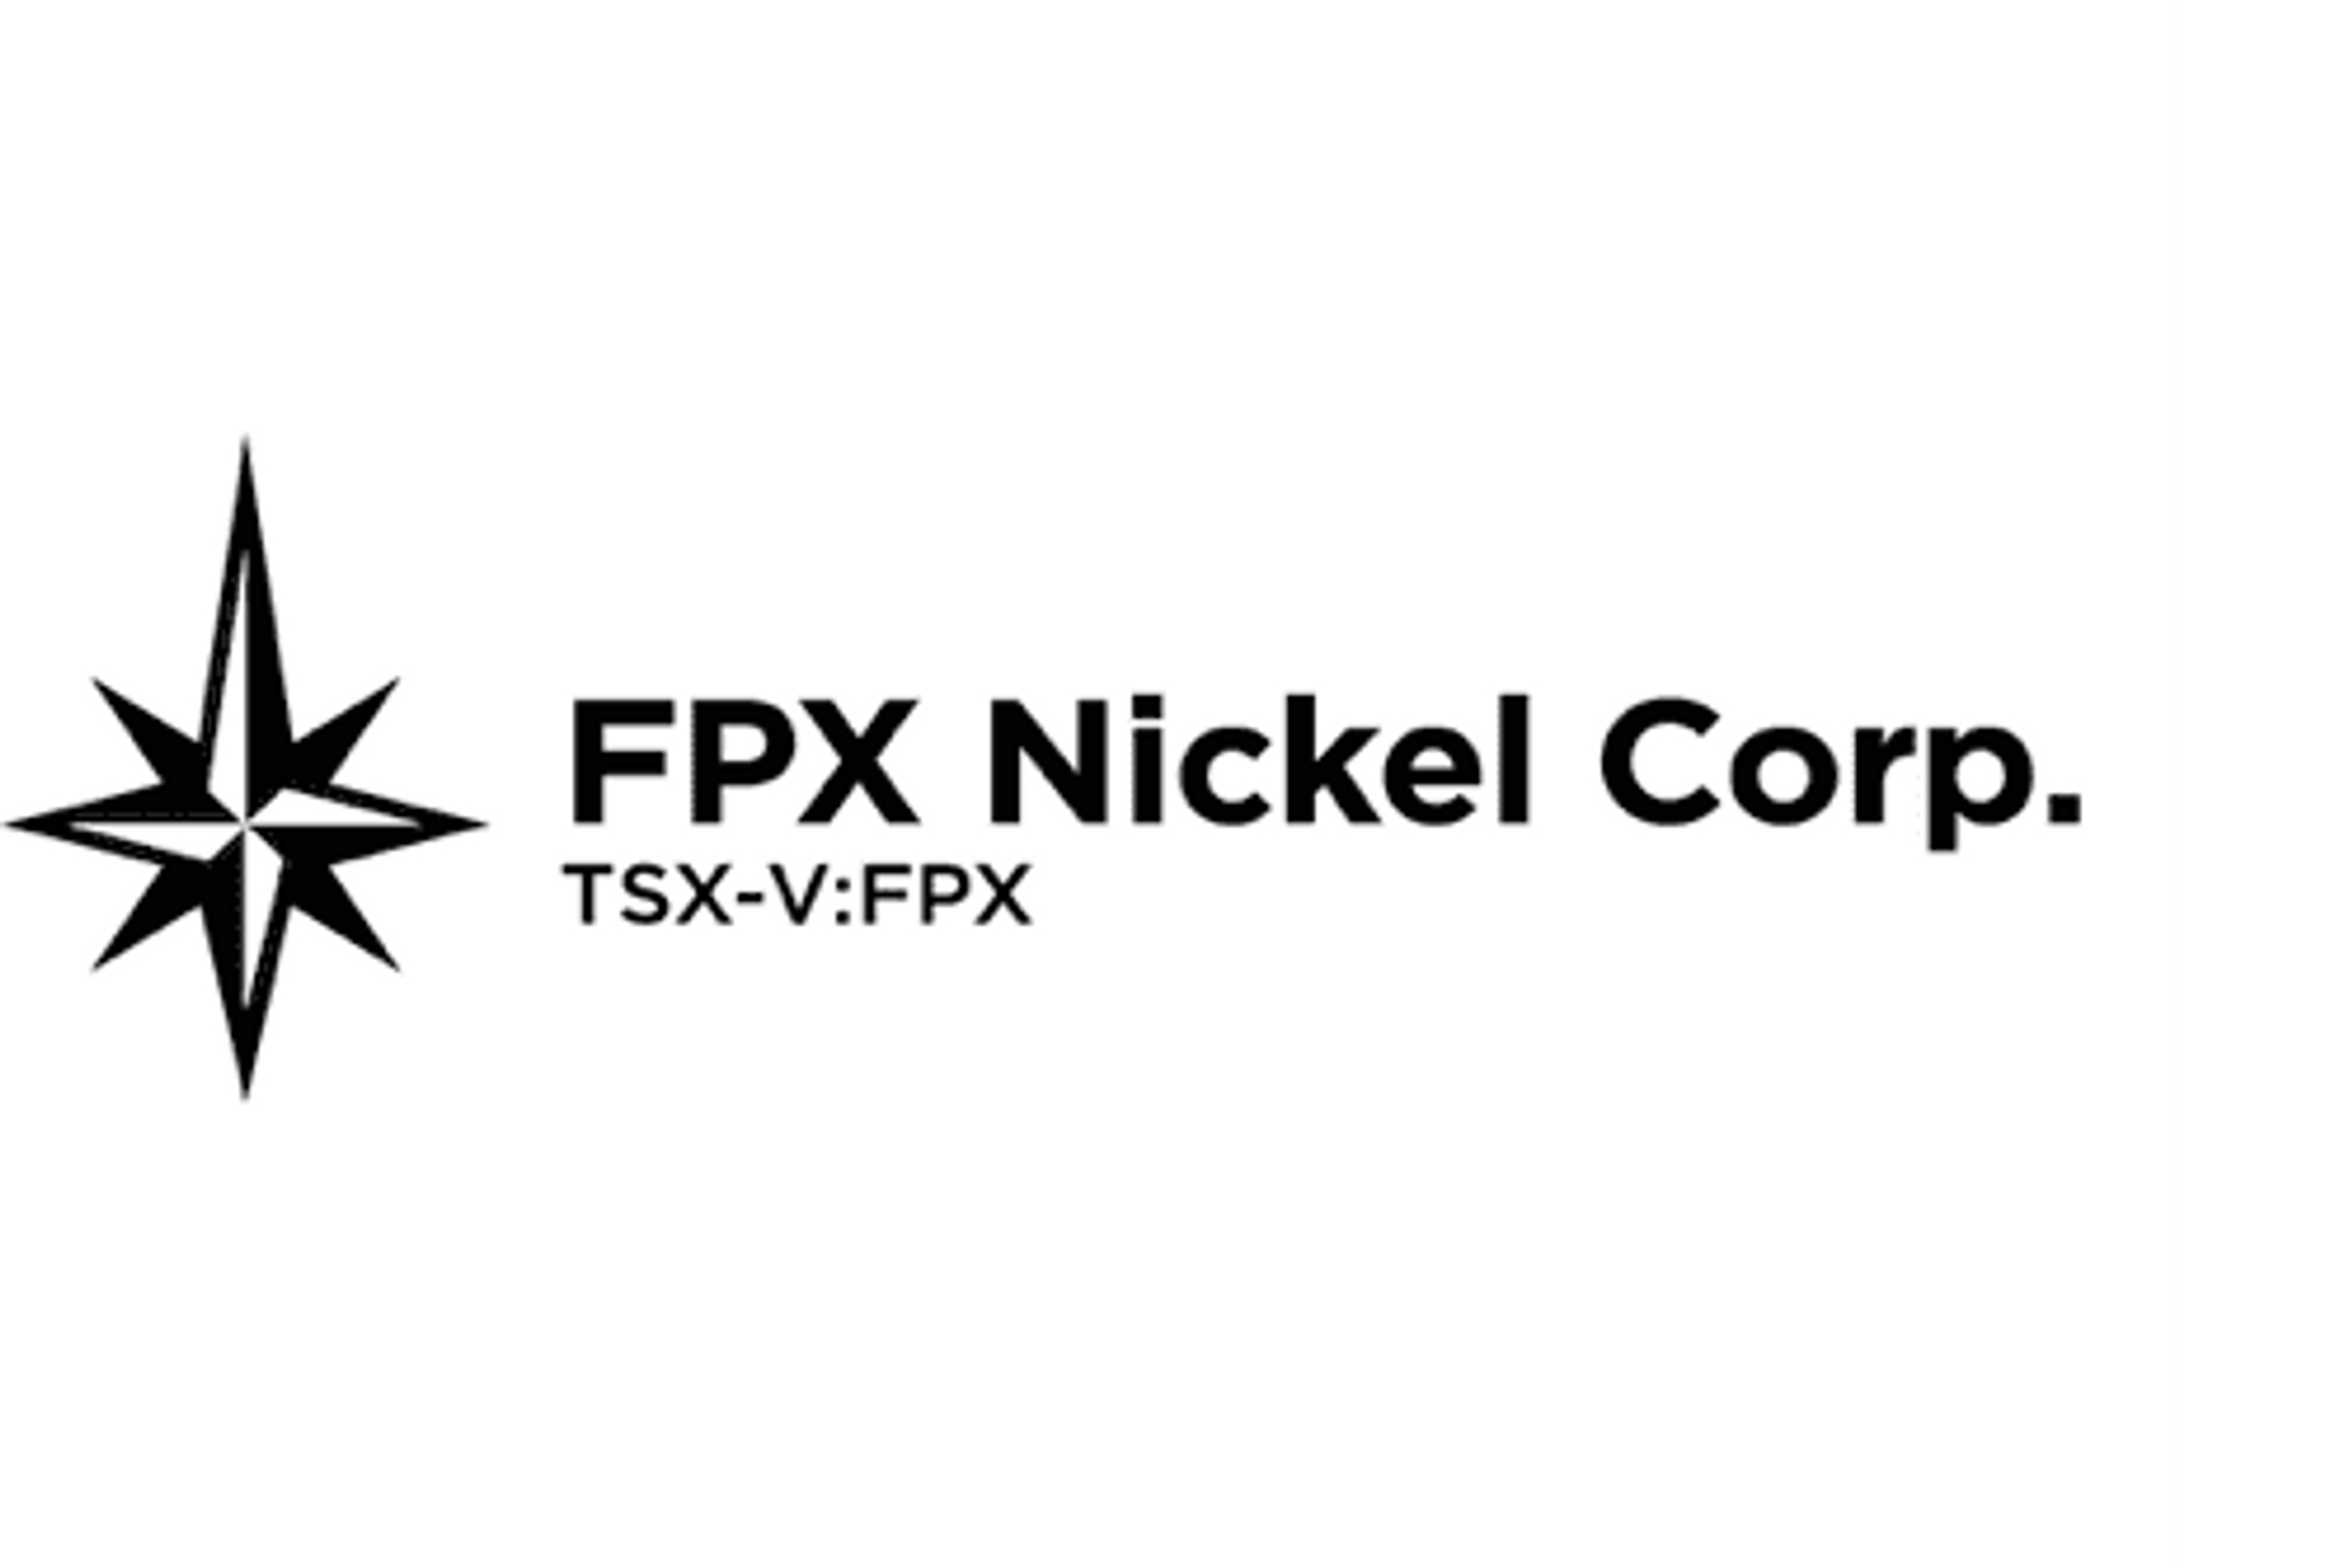 FPX Nickel Announces Board Appointment of Anne Currie, Former Senior Partner with Environmental Resources Management 